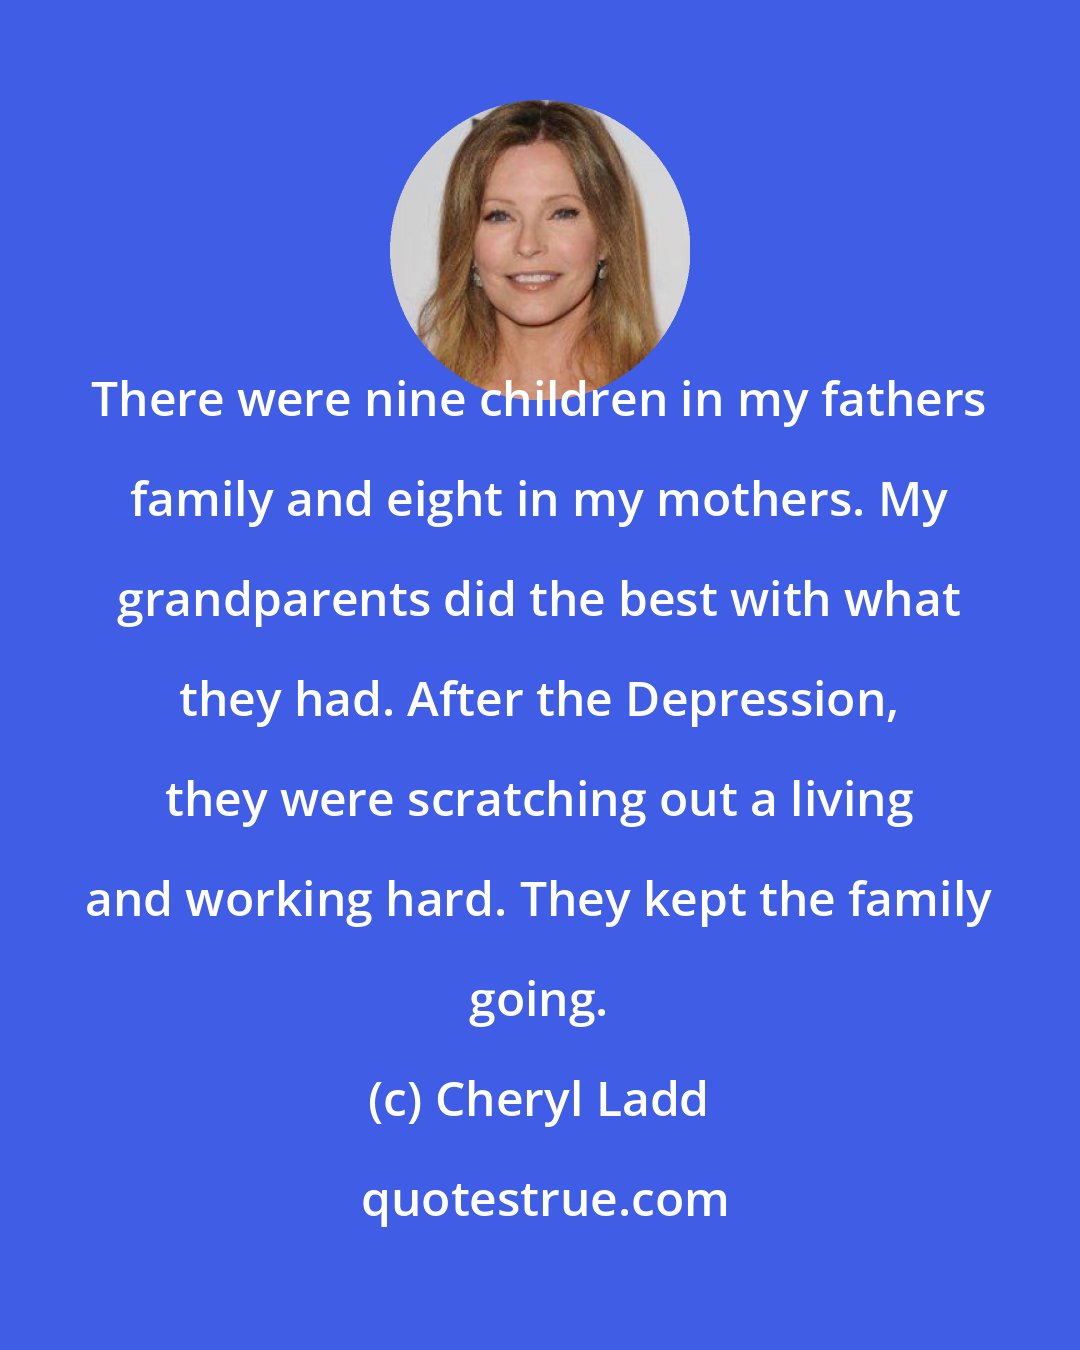 Cheryl Ladd: There were nine children in my fathers family and eight in my mothers. My grandparents did the best with what they had. After the Depression, they were scratching out a living and working hard. They kept the family going.